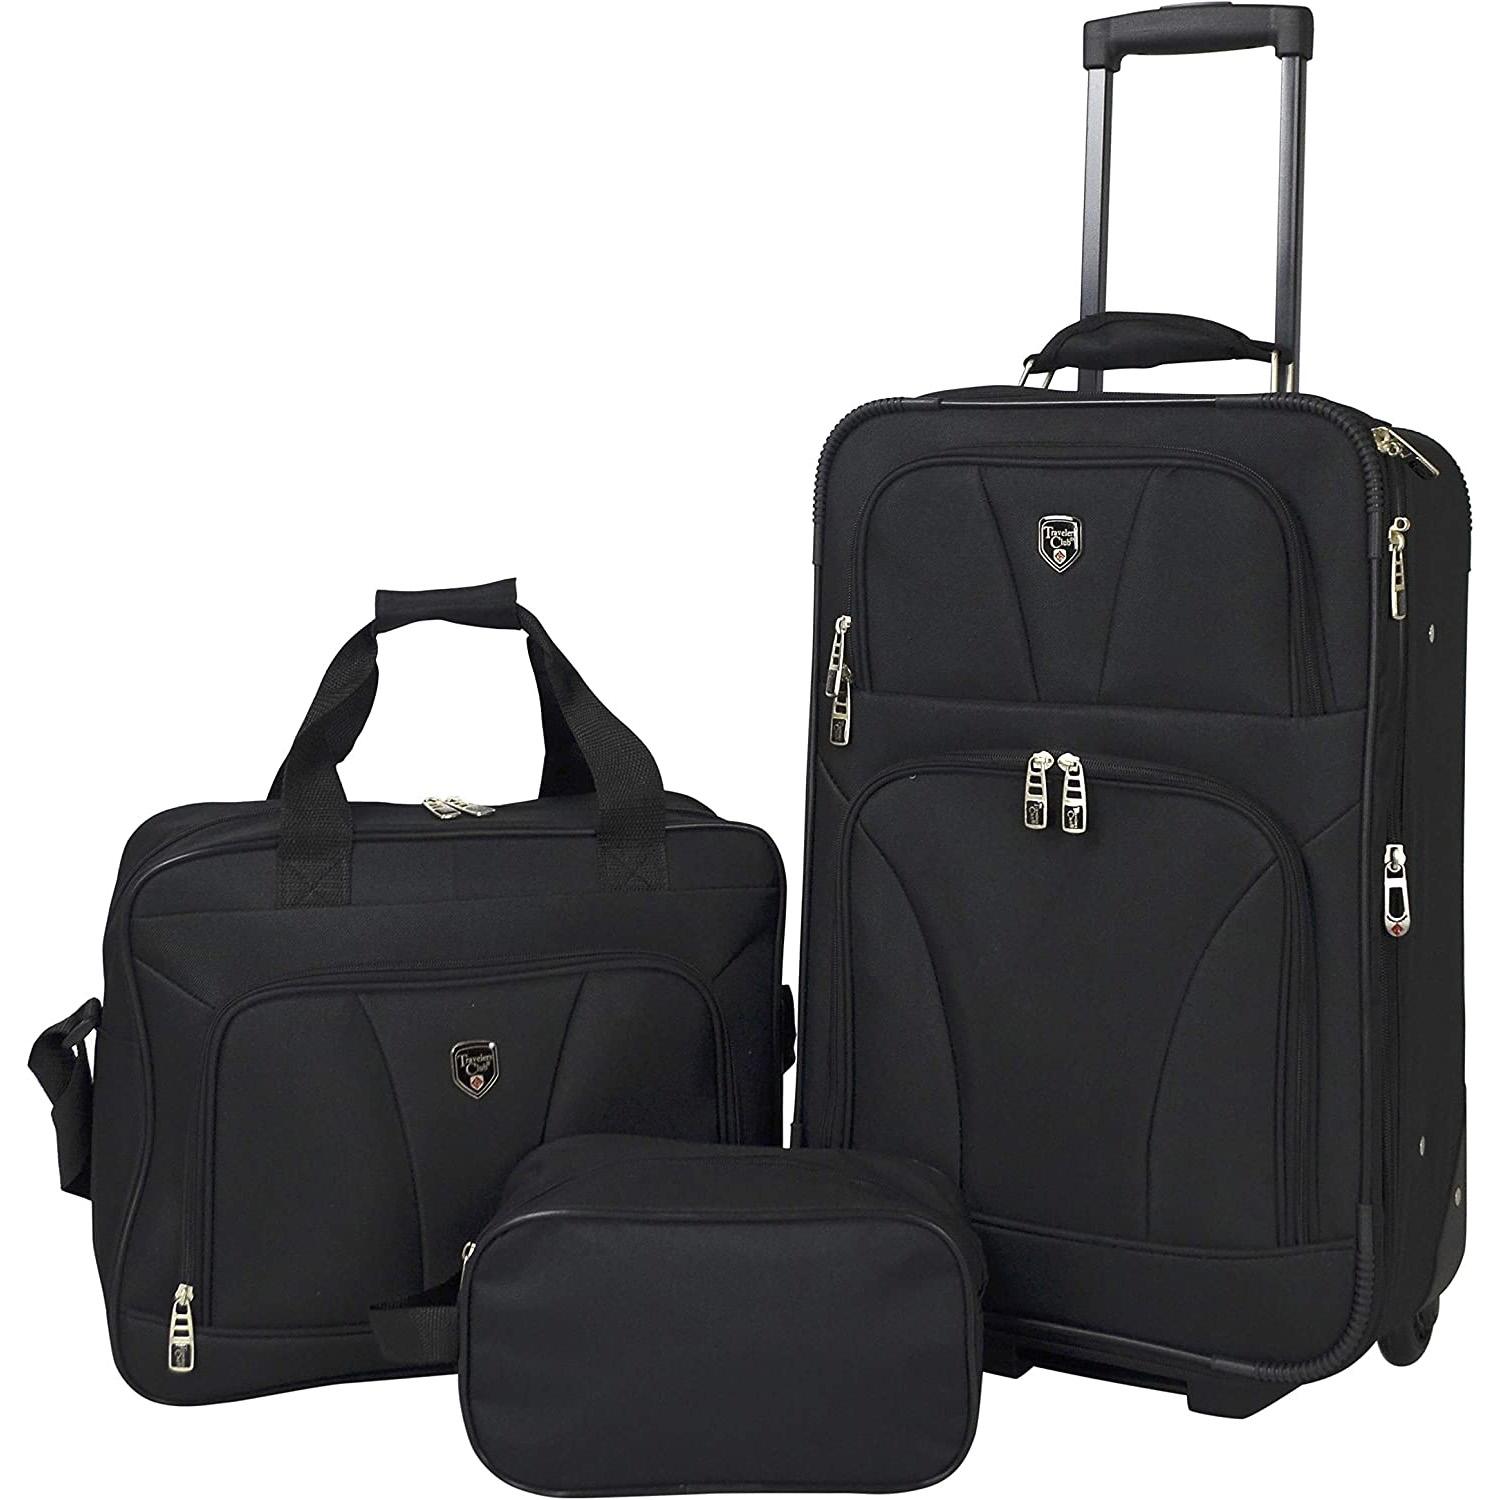 Travelers Club Bowman 3-Piece Expandable Luggage Set for $32.99